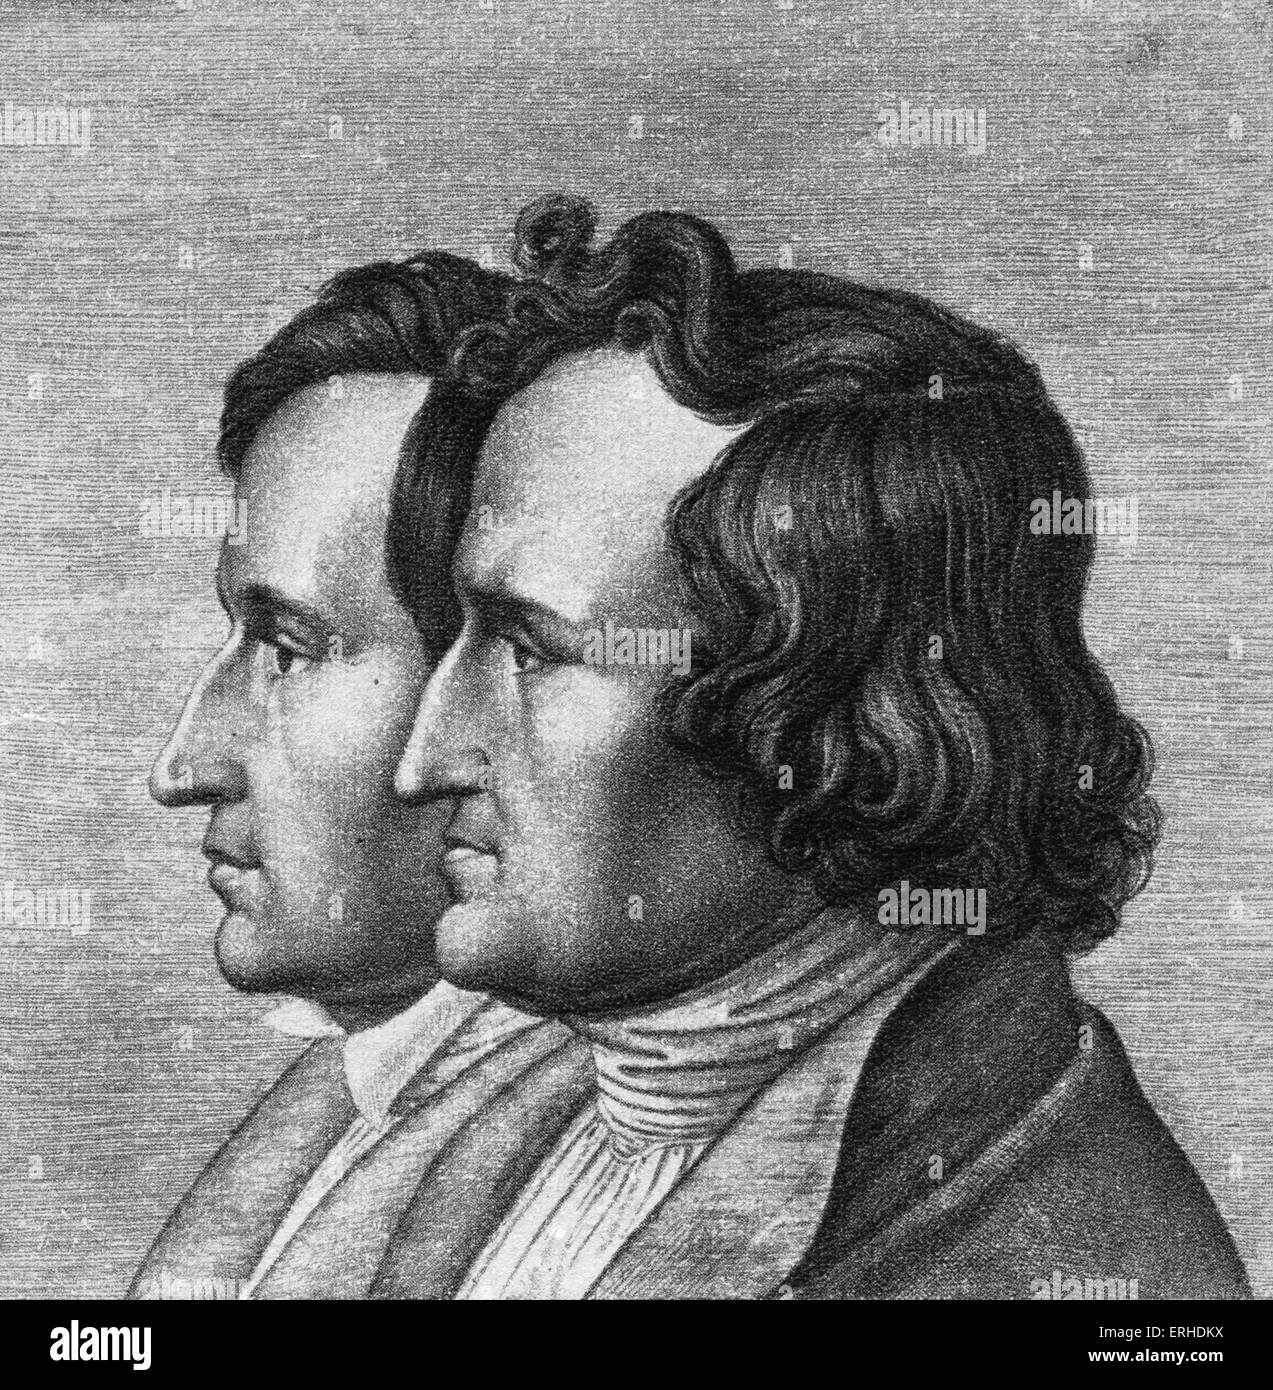 Jacob & Wilhelm Grimm - Brothers Grimm German authors of fairy tales, folk songs, folk tales based on pre-Christian Germanic Stock Photo